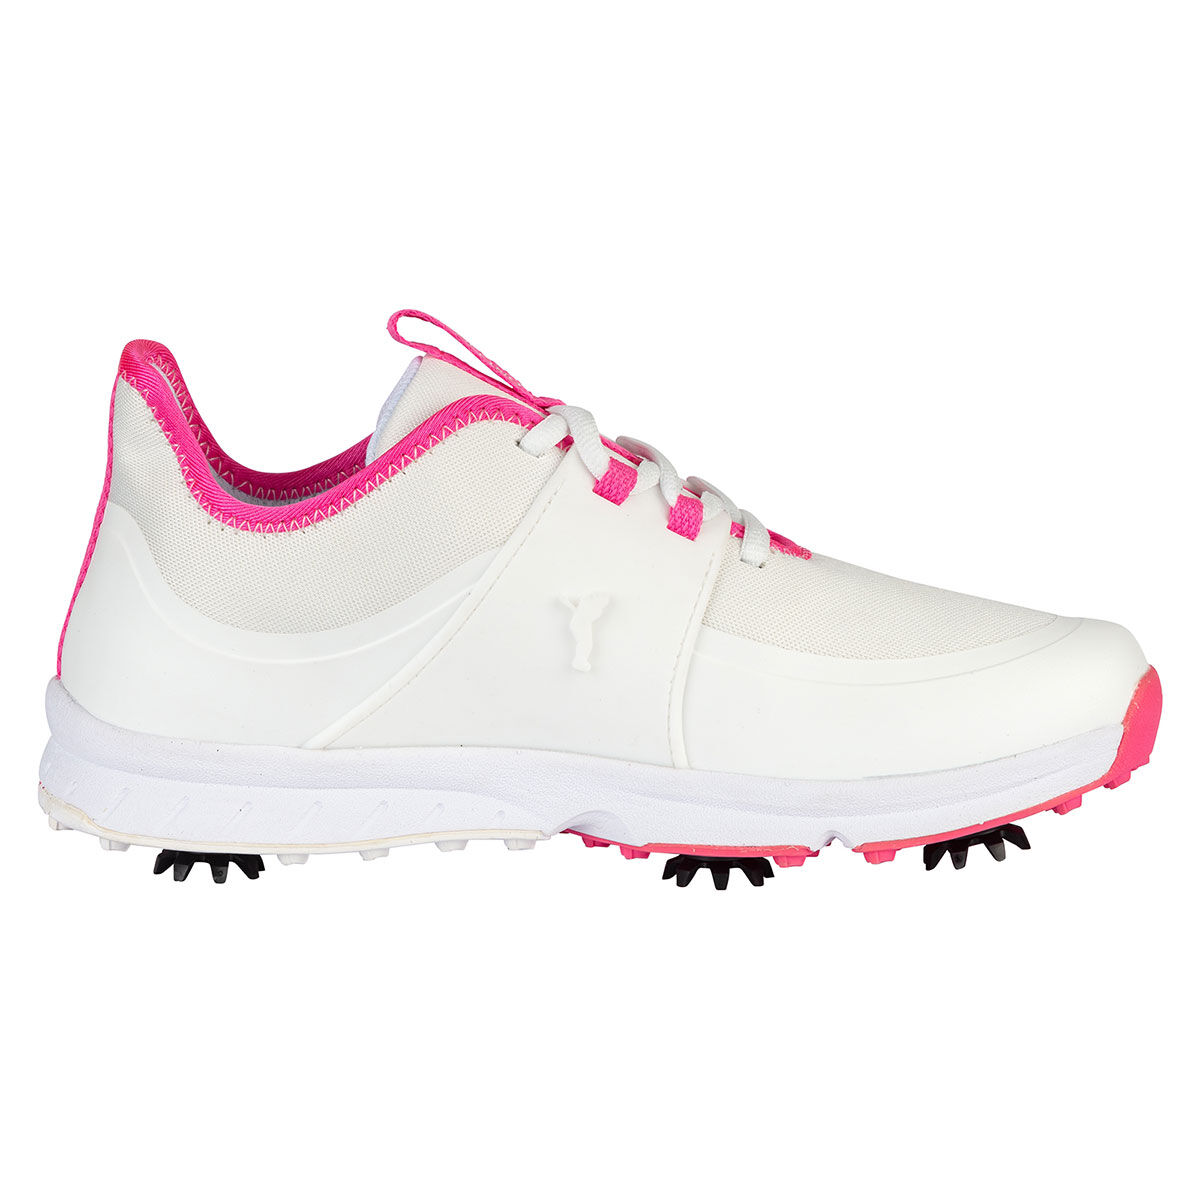 GOLFINO Women’s White and Pink Comfortable Linda Waterproof Spiked Golf Shoes, Size: 5 | American Golf